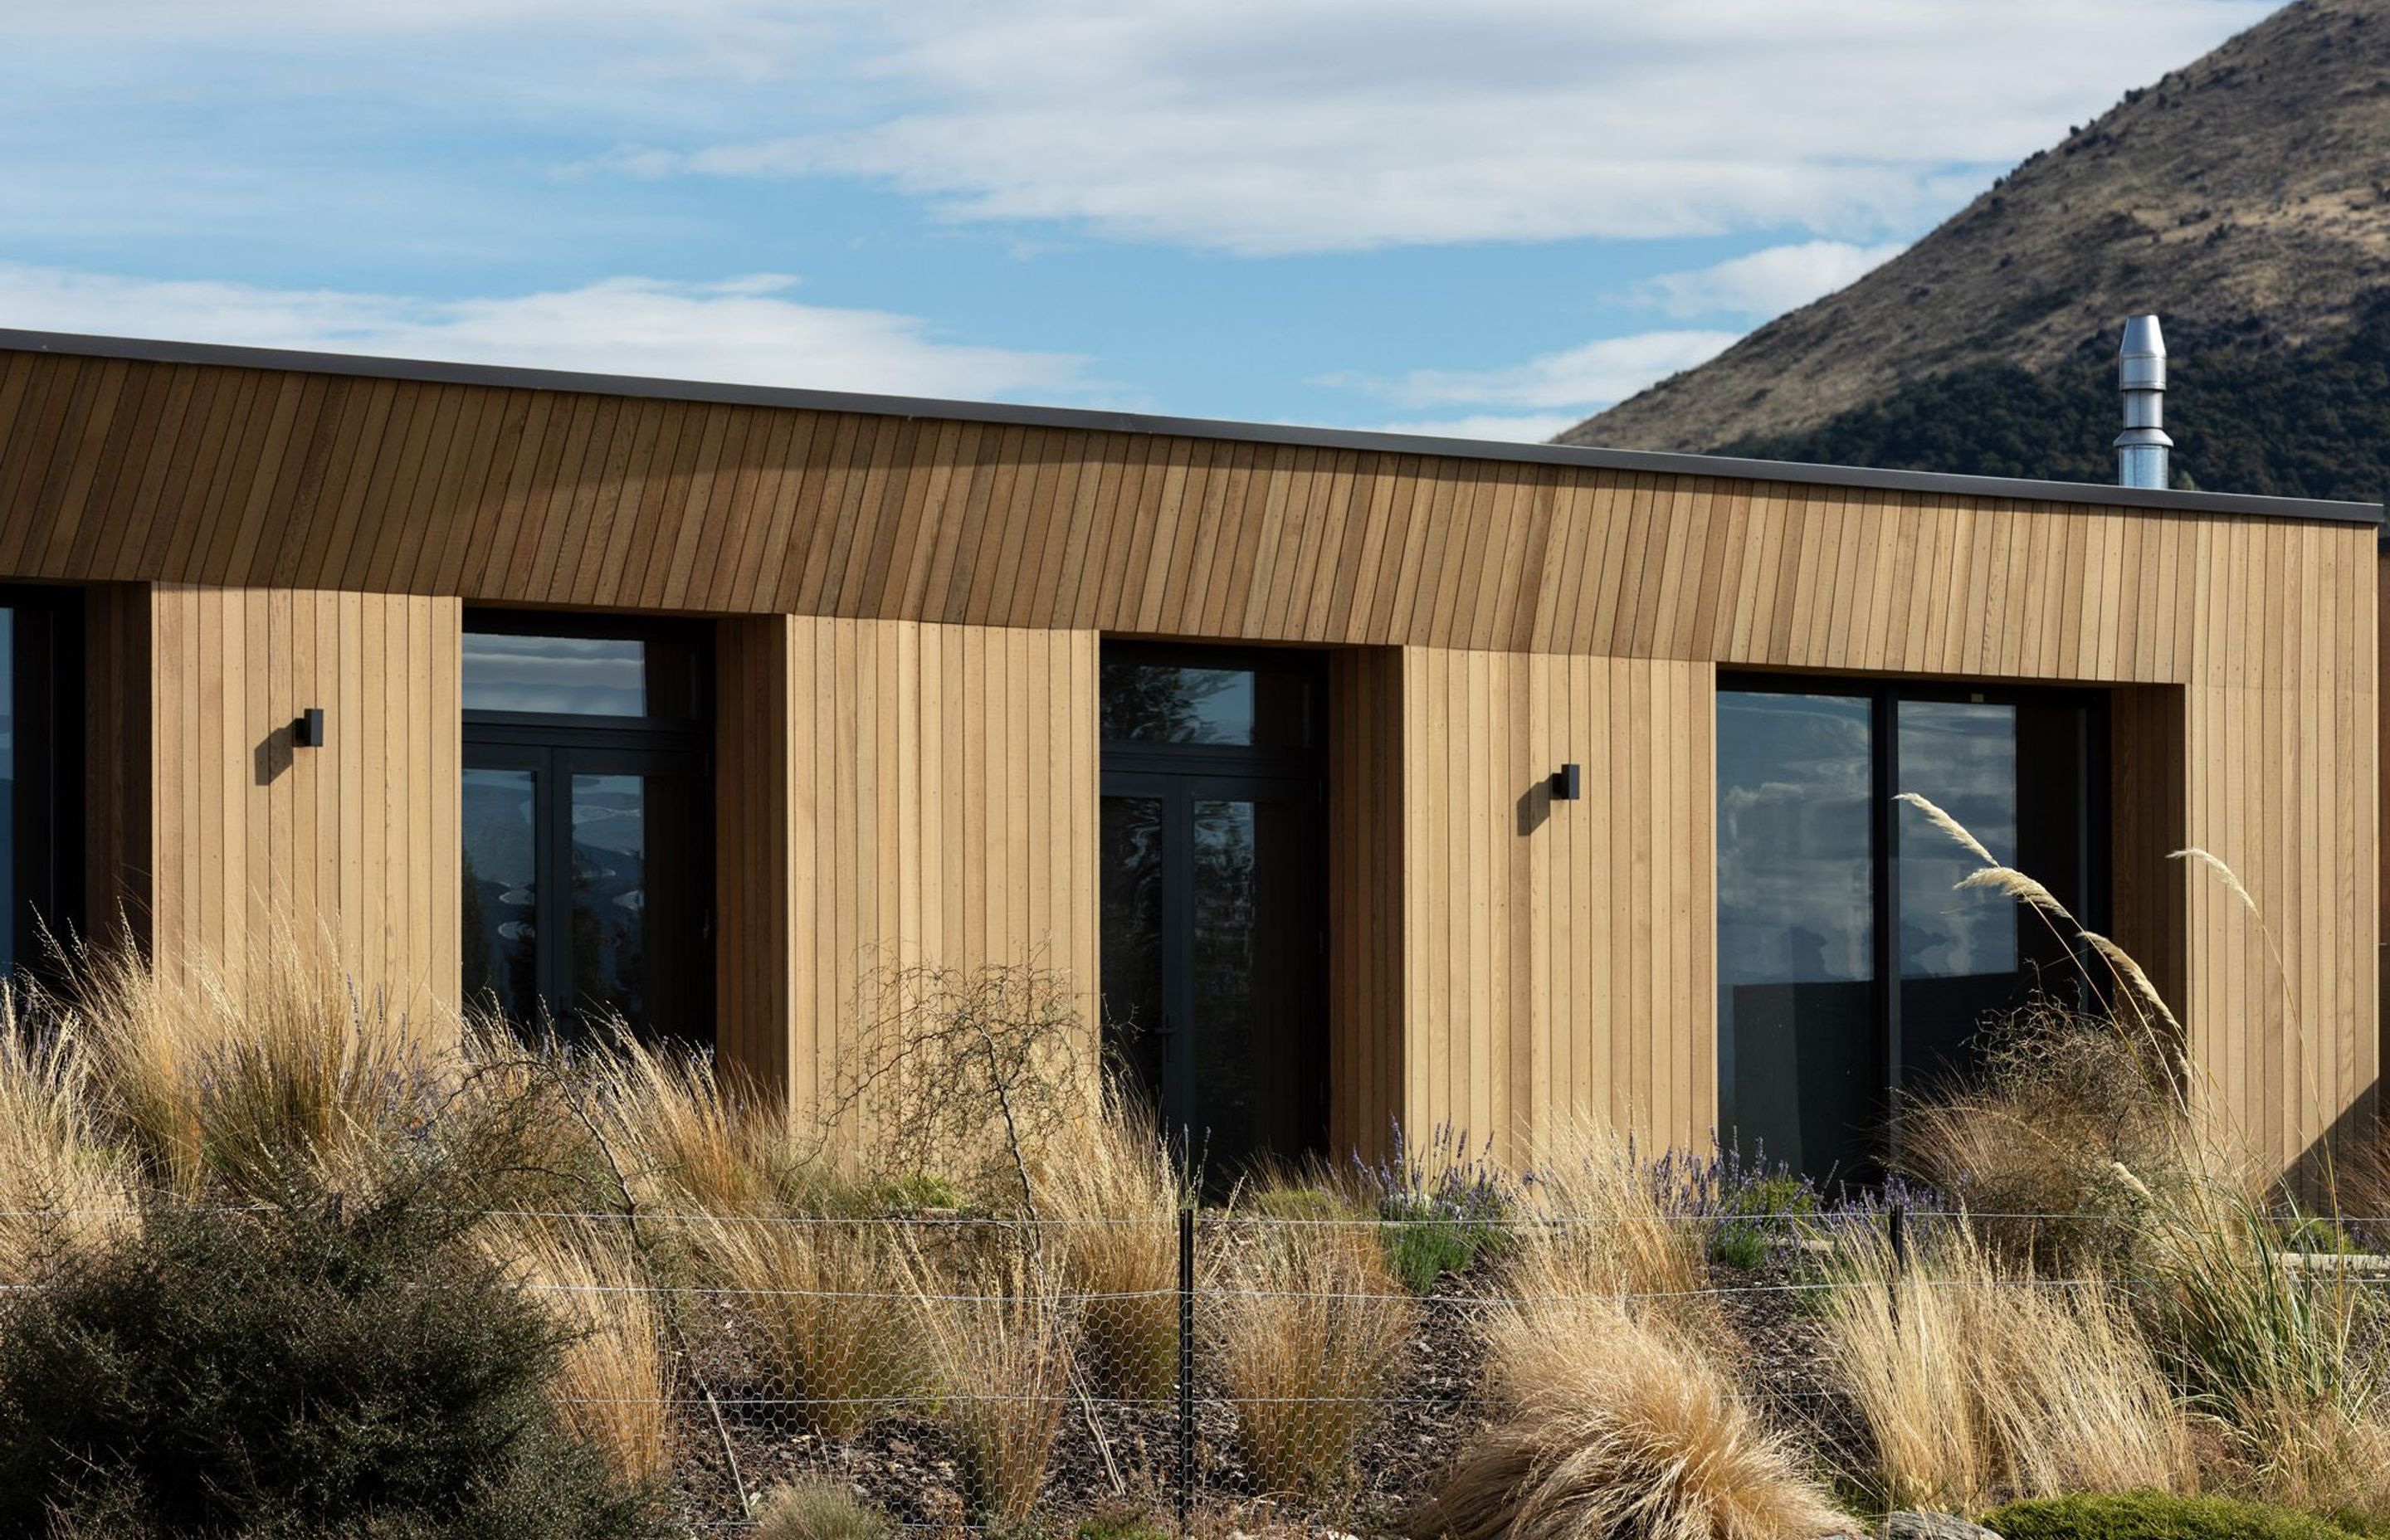 Angled timber cladding and deep, recessed windows provide shelter from the sun during the hot Otago summers.